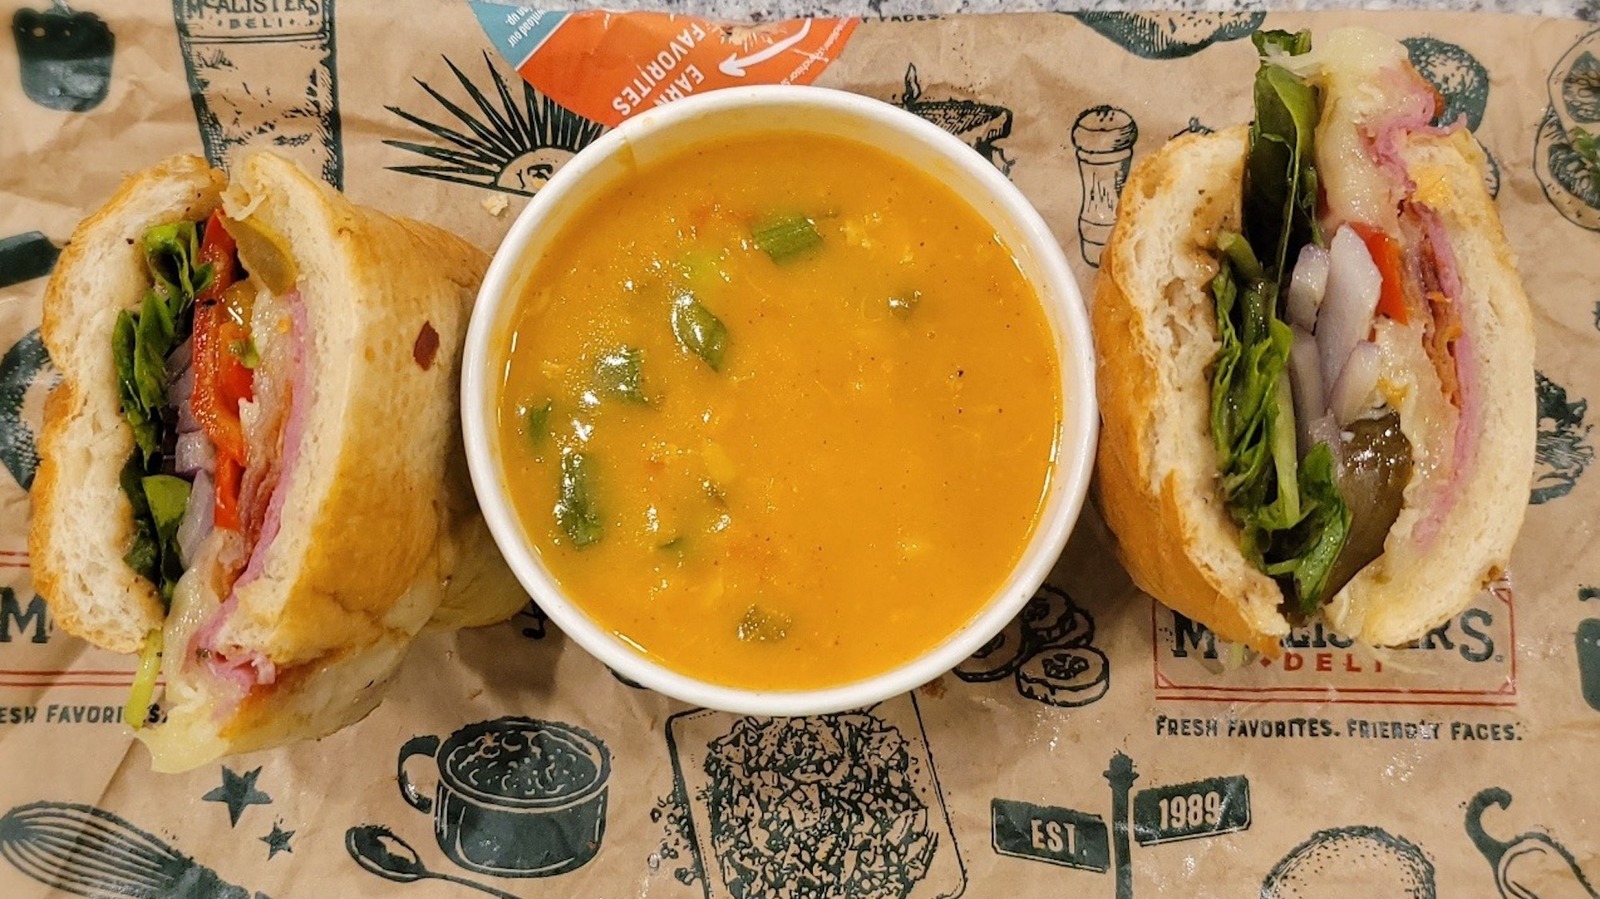 https://www.mashed.com/img/gallery/the-worst-soup-at-mcalisters-deli-according-to-40-of-people/l-intro-1635178964.jpg